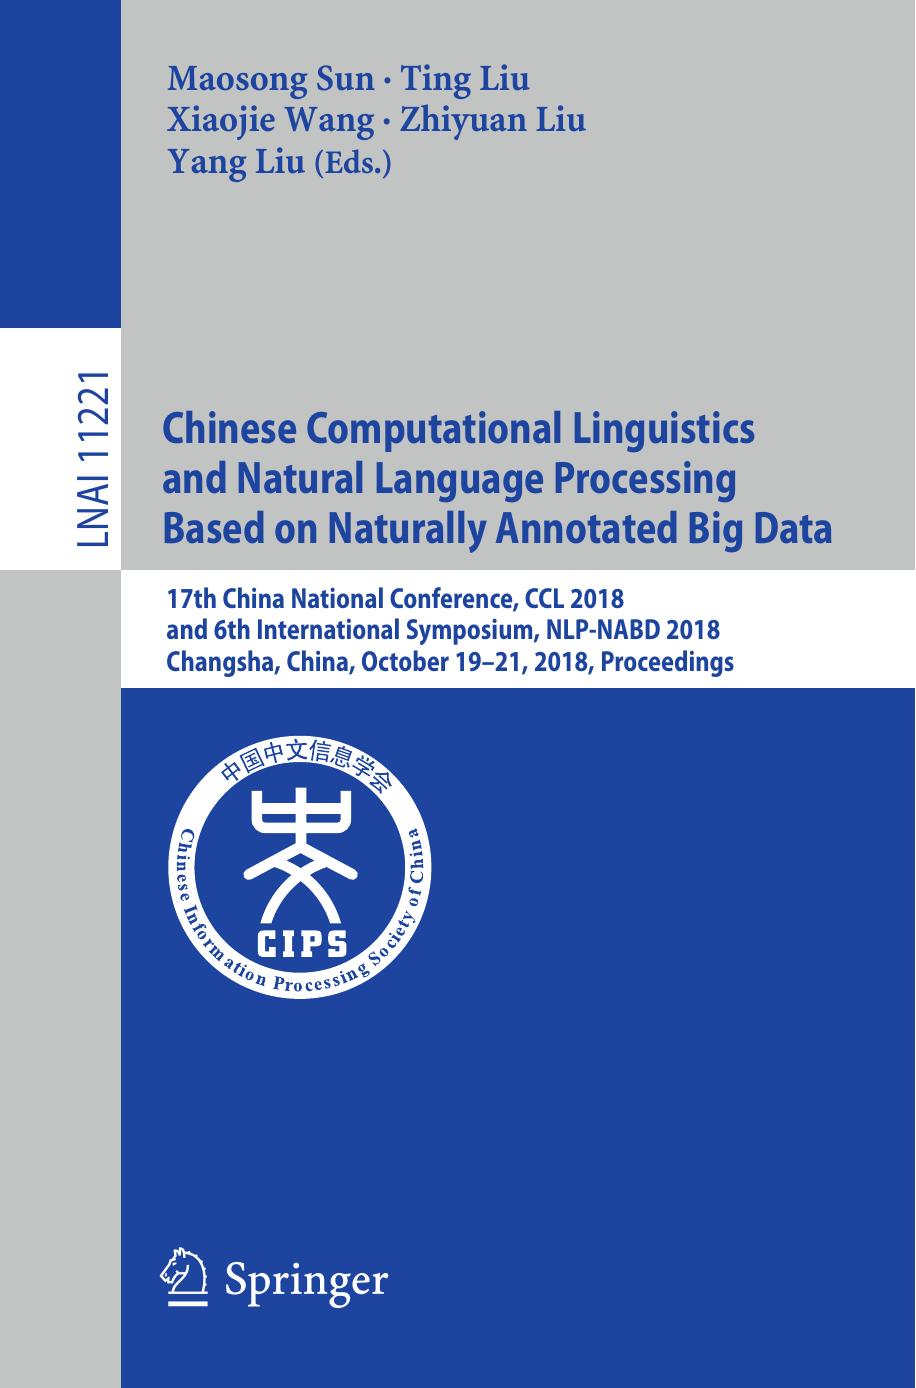 Chinese Computational Linguistics and Natural Language Processing Based on Naturally Annotated Big Data: 17th China National Conference, CCL 2018, and 6th International Symposium, NLP-NABD 2018, Changsha, China, October 19–21, 2018, Proceedings